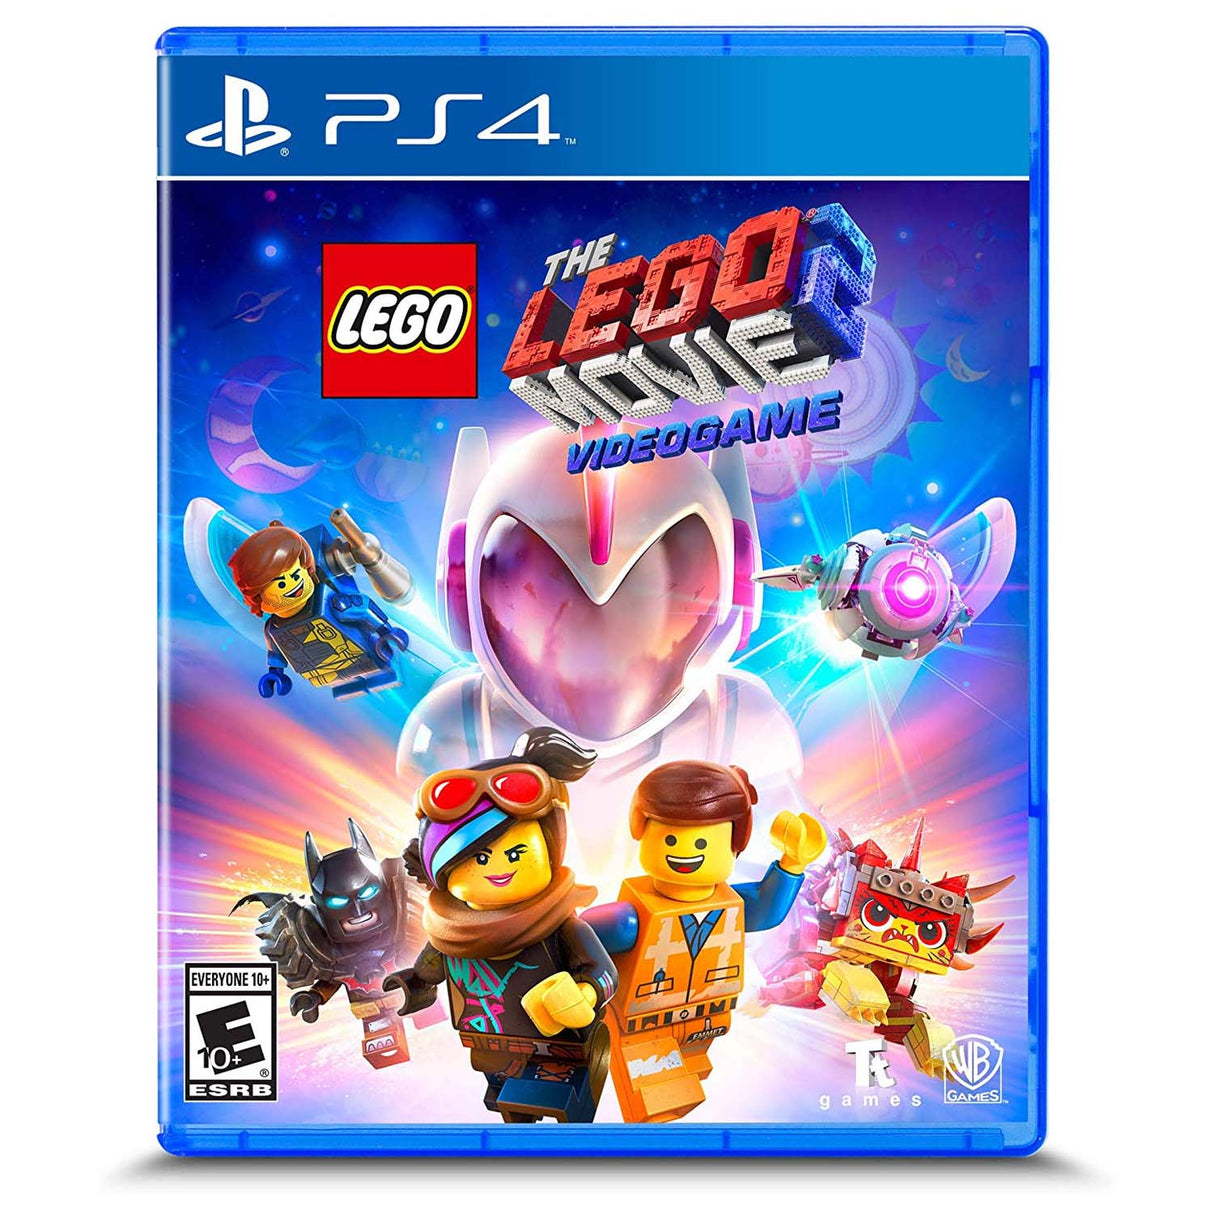 The LEGO Movie 2 Videogame For PlayStation 4 "Region 2" - Level UpLevel UpPlaystation Video Games5051892220255